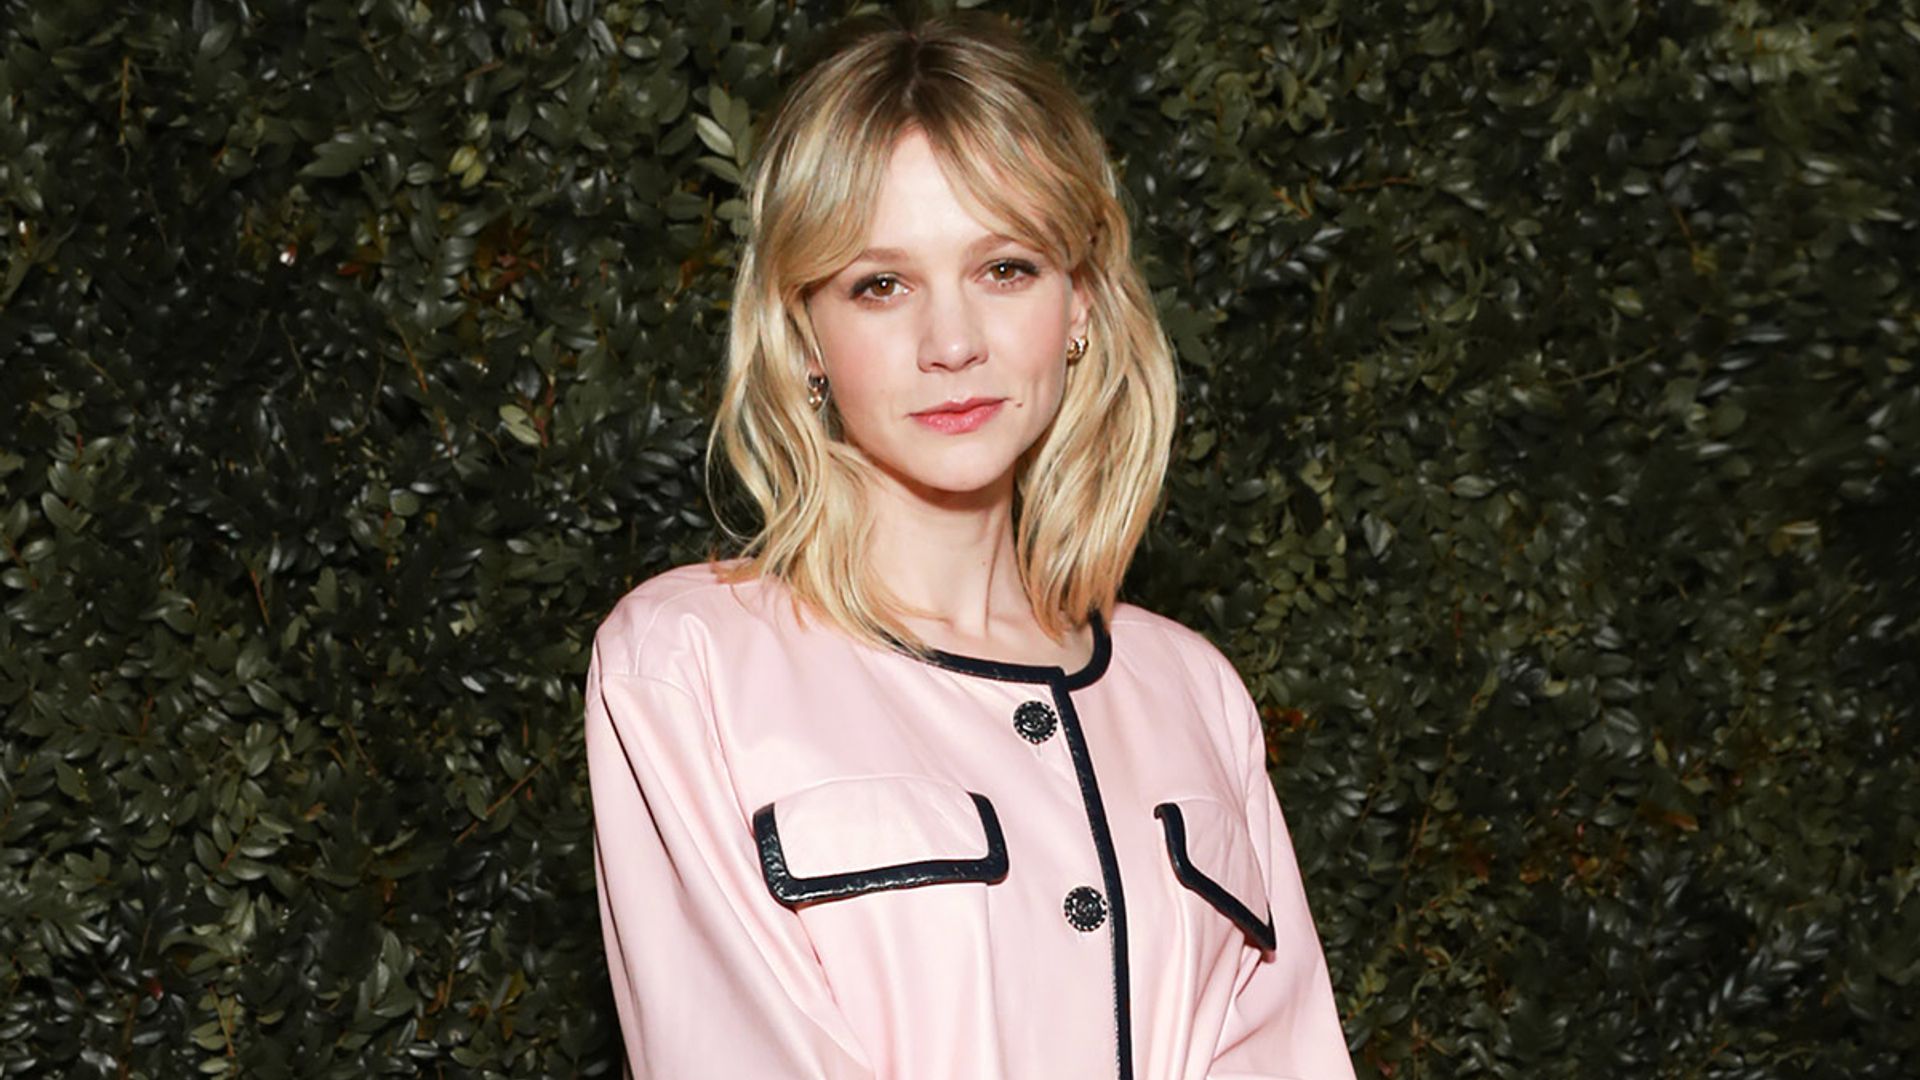 Carey Mulligan responds to Promising Young Woman criticism: 'It stuck with me'